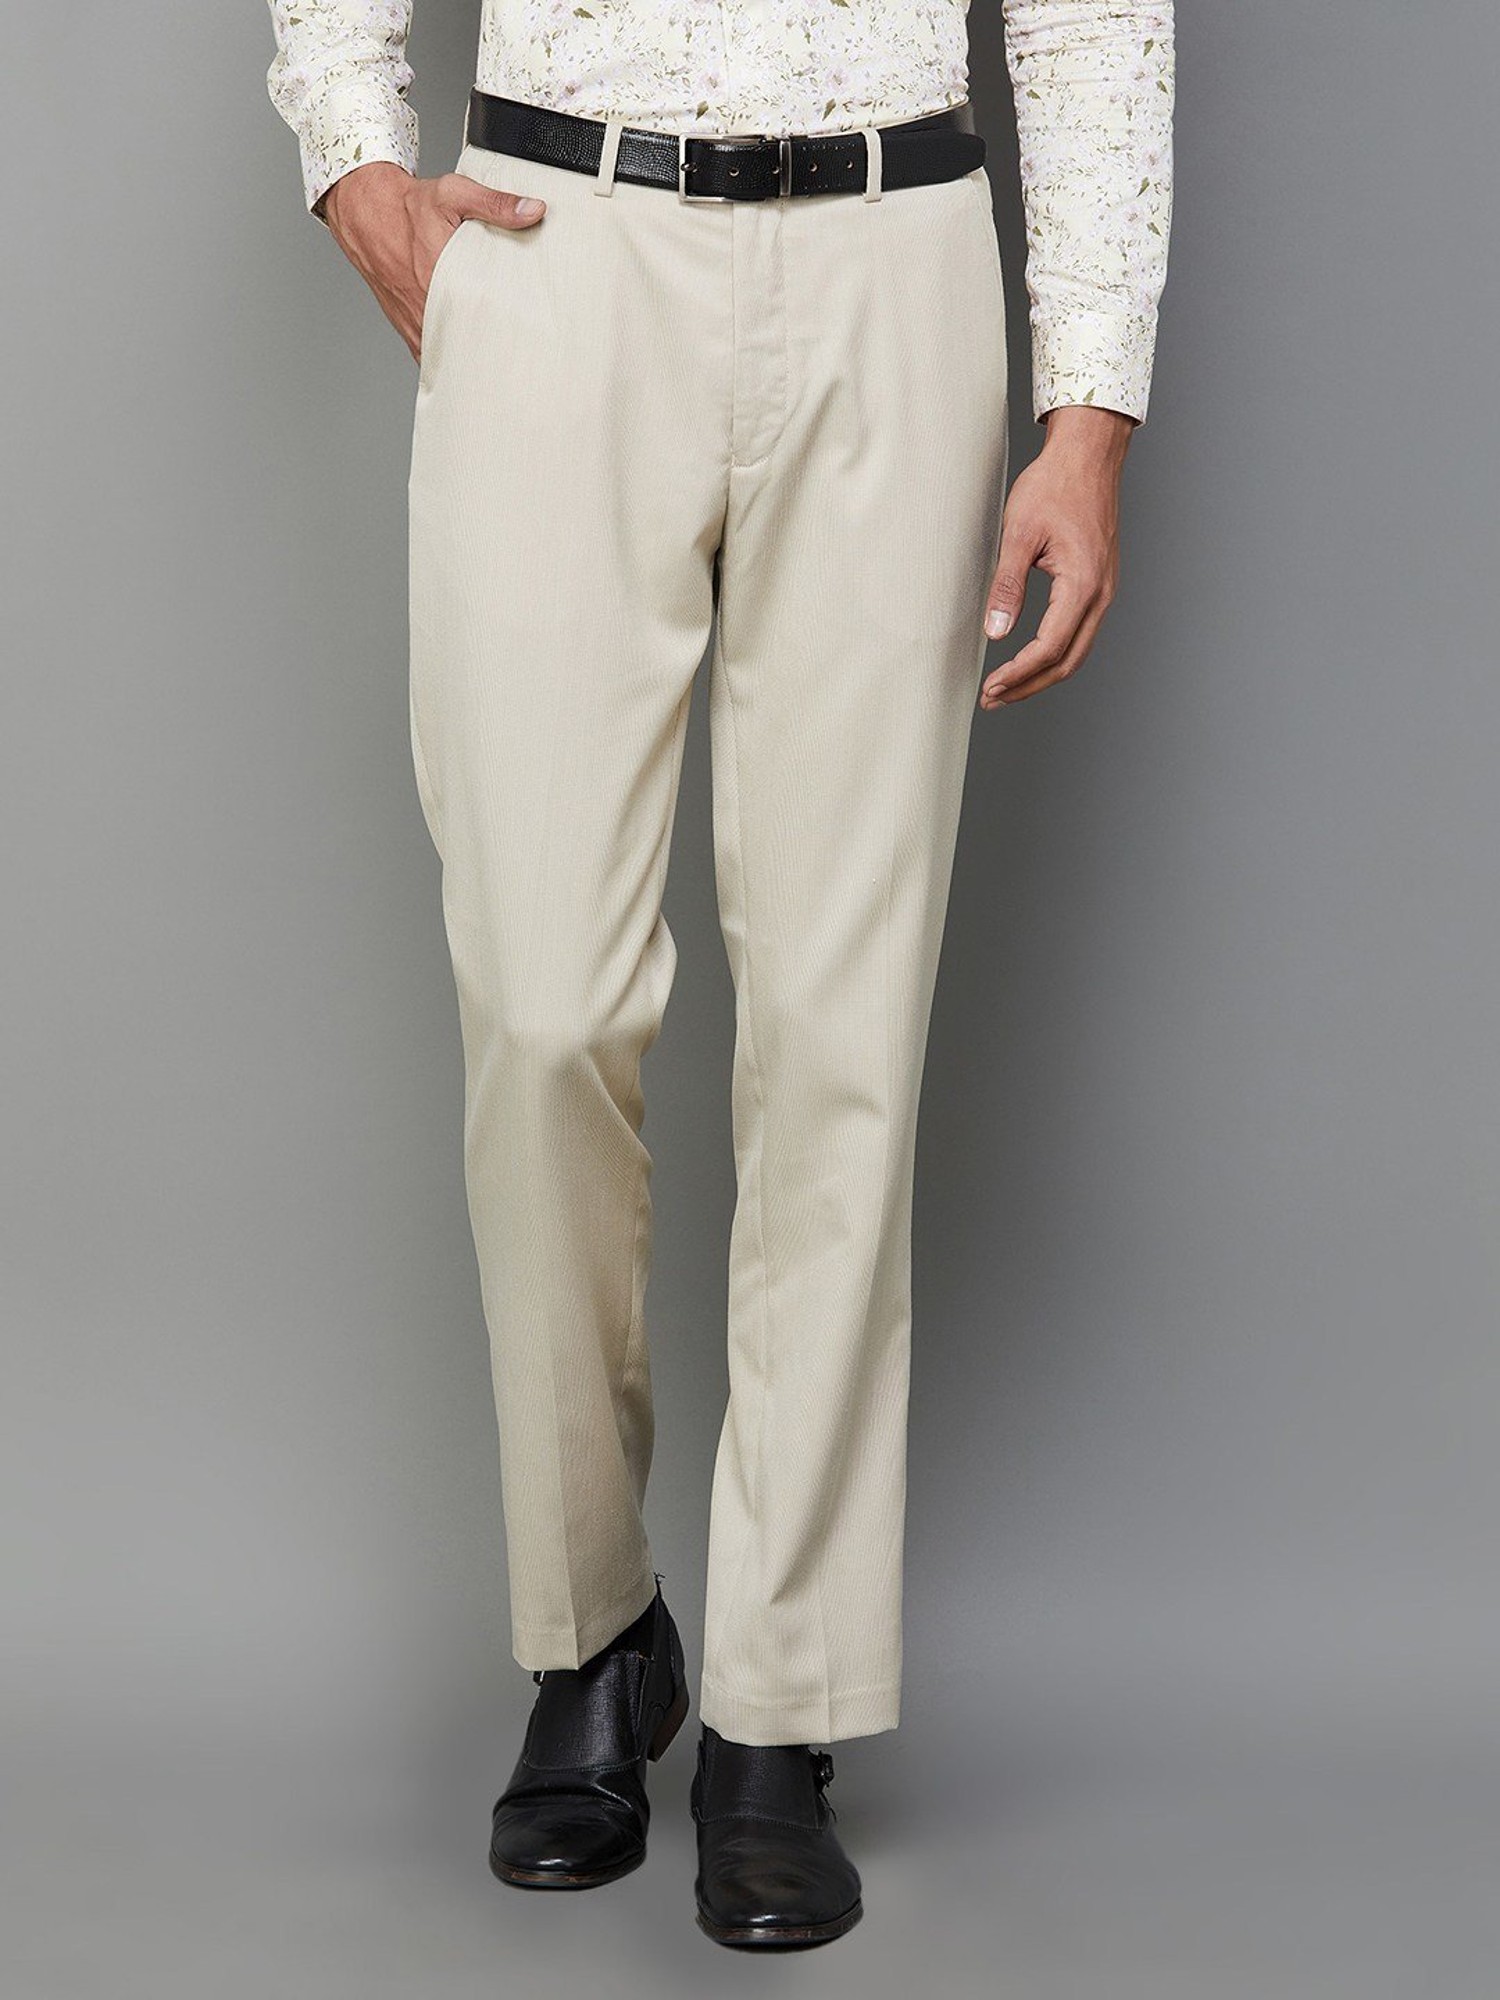 Buy Black Trousers  Pants for Men by CODE BY LIFESTYLE Online  Ajiocom